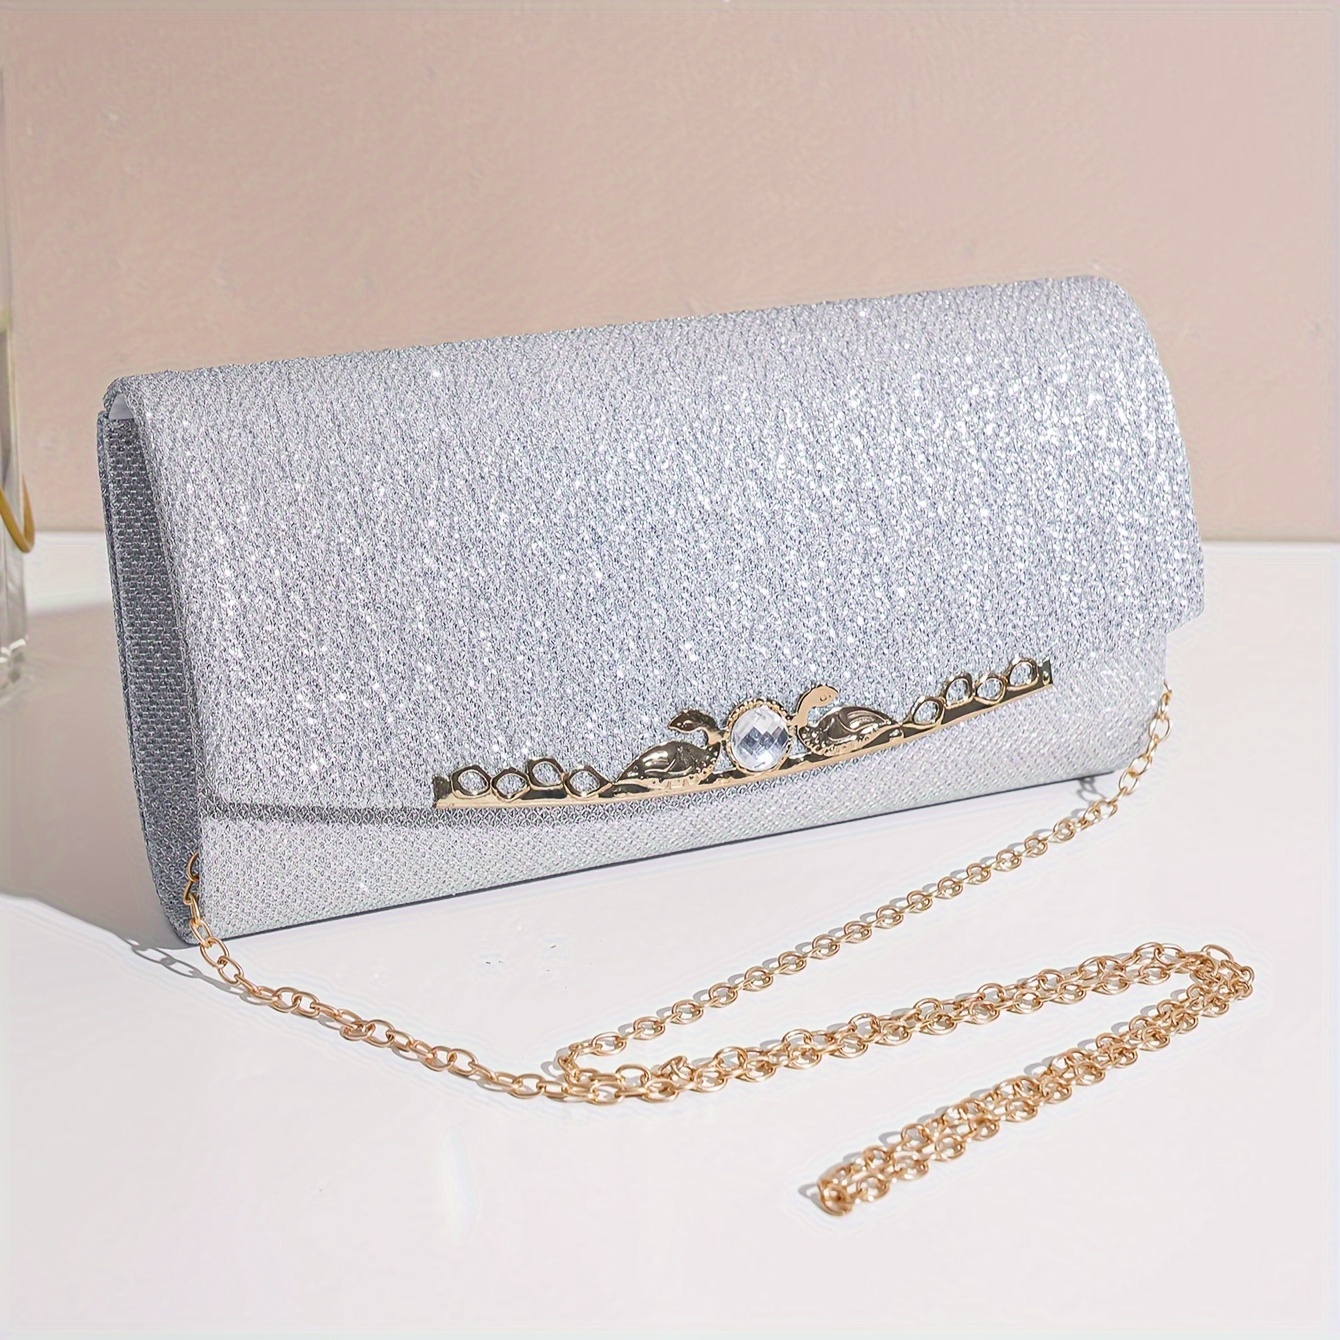 

Elegant Glitter Evening Clutch For Women With Rhinestone Decor, Detachable Chain Strap, Ideal For Party, Banquet, Gift, Wedding